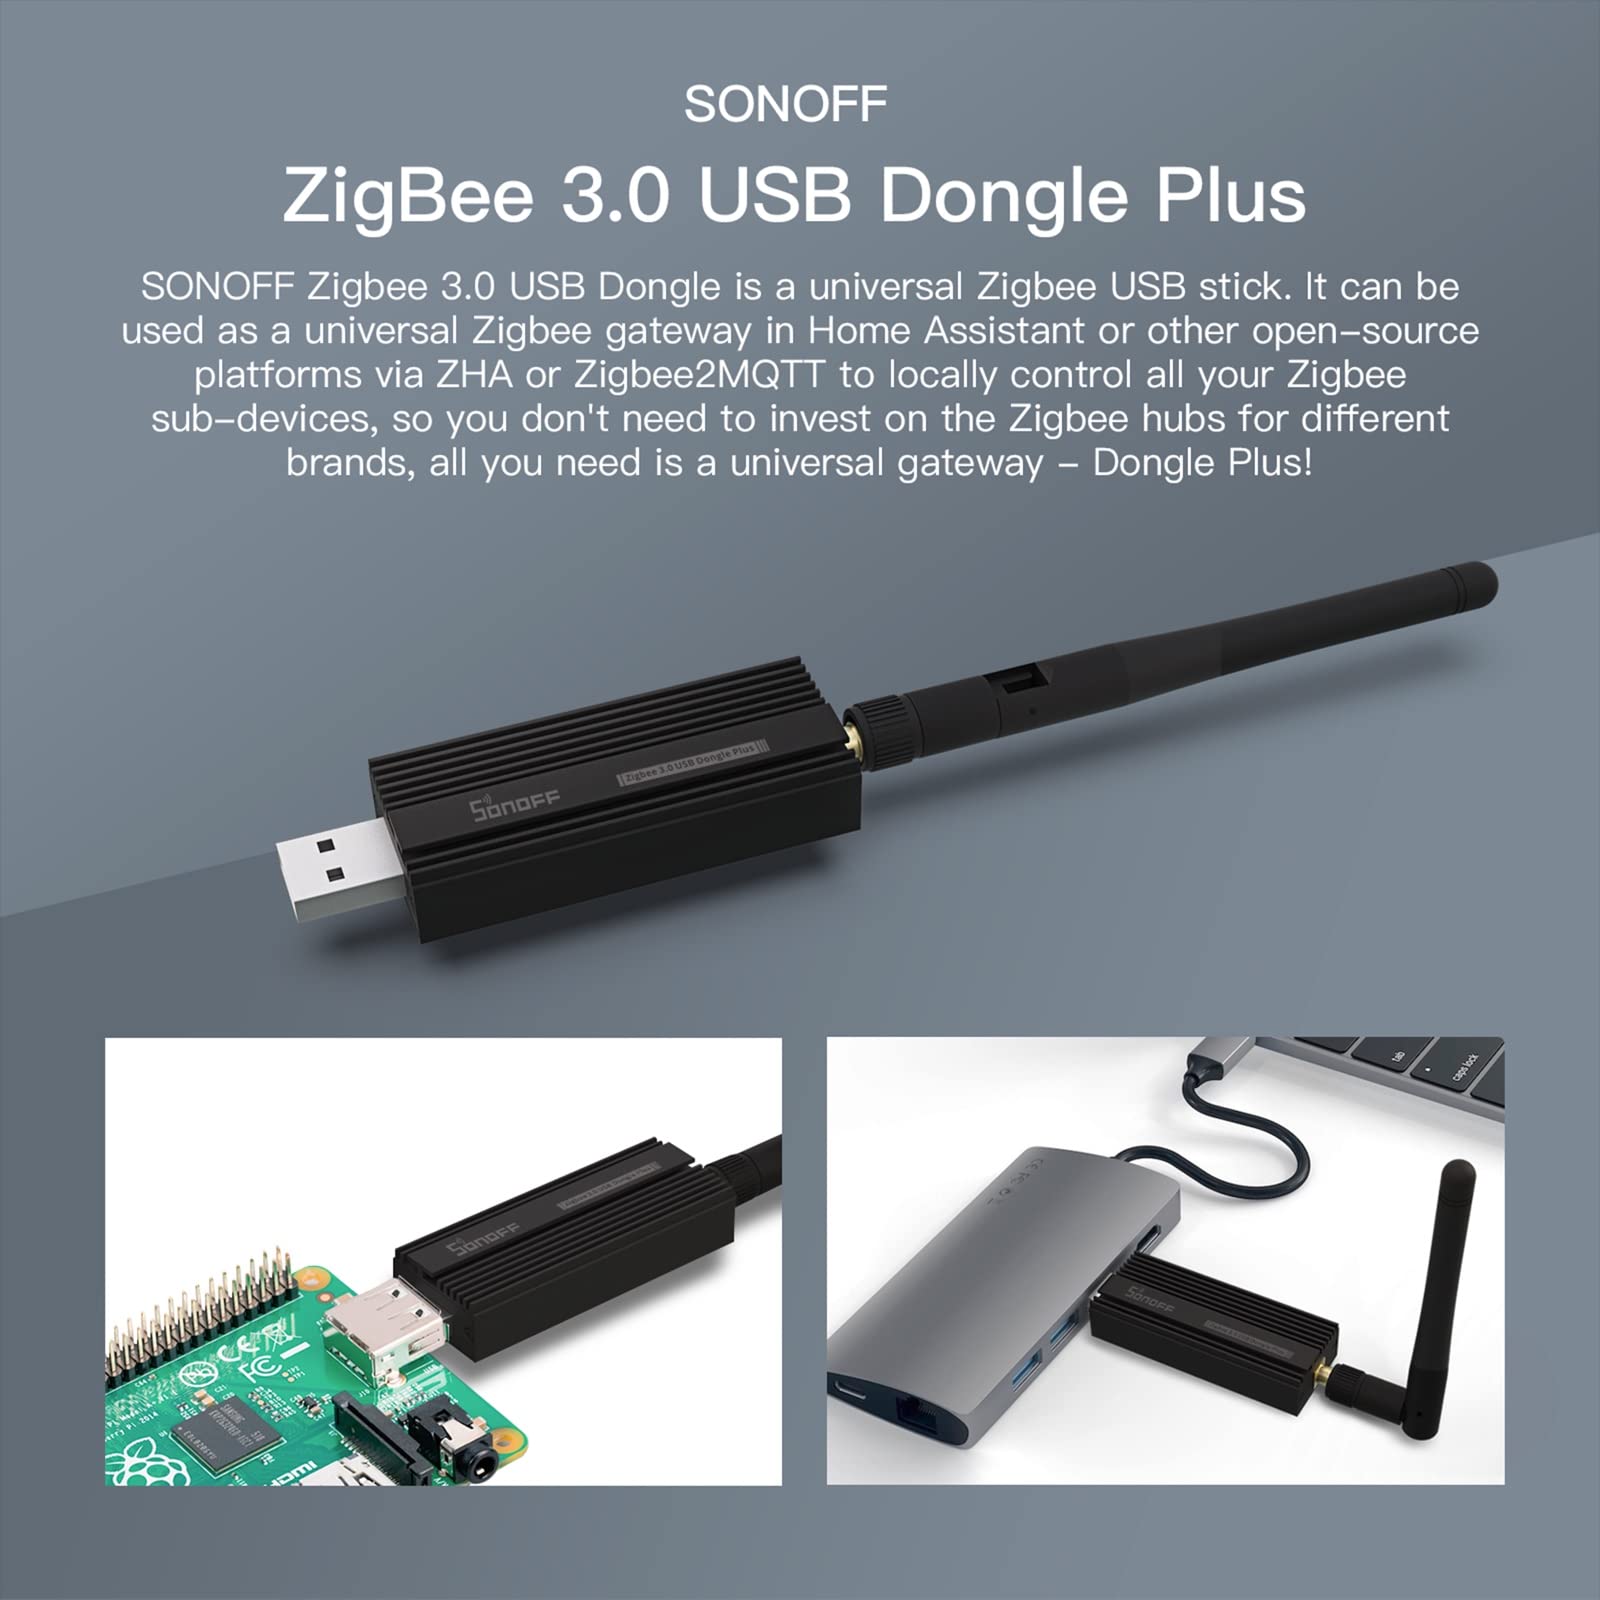 SONOFF Universal Zigbee 3.0 USB Dongle Plus Gateway with Antenna for Home Assistant, Open HAB etc.